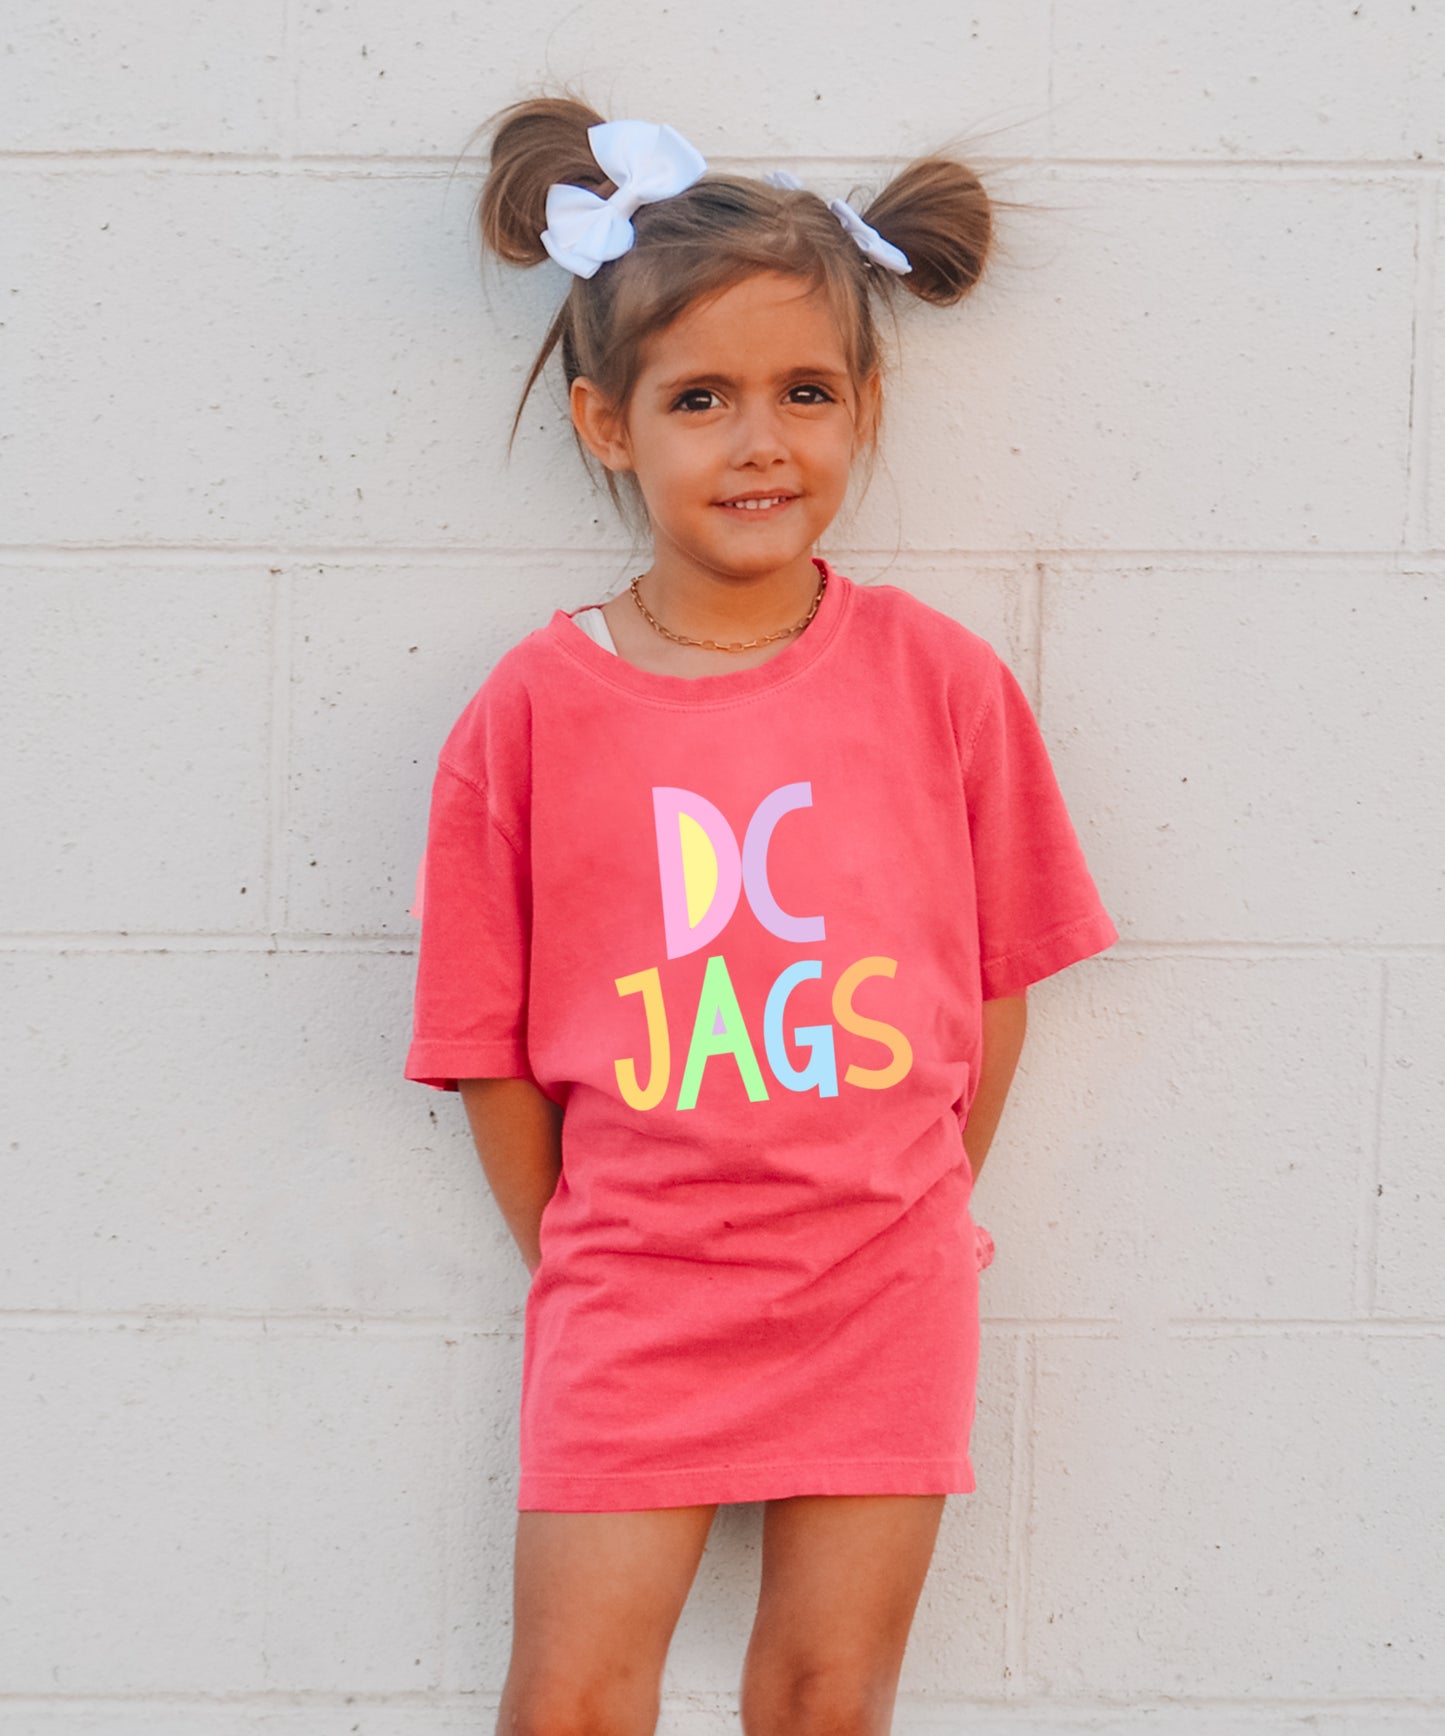 Comfort Colors DC Jags Pastel Unisex Shirt / Youth and Adult Sizes/ Desoto Central -Desoto County Schools / Mississippi School Shirt